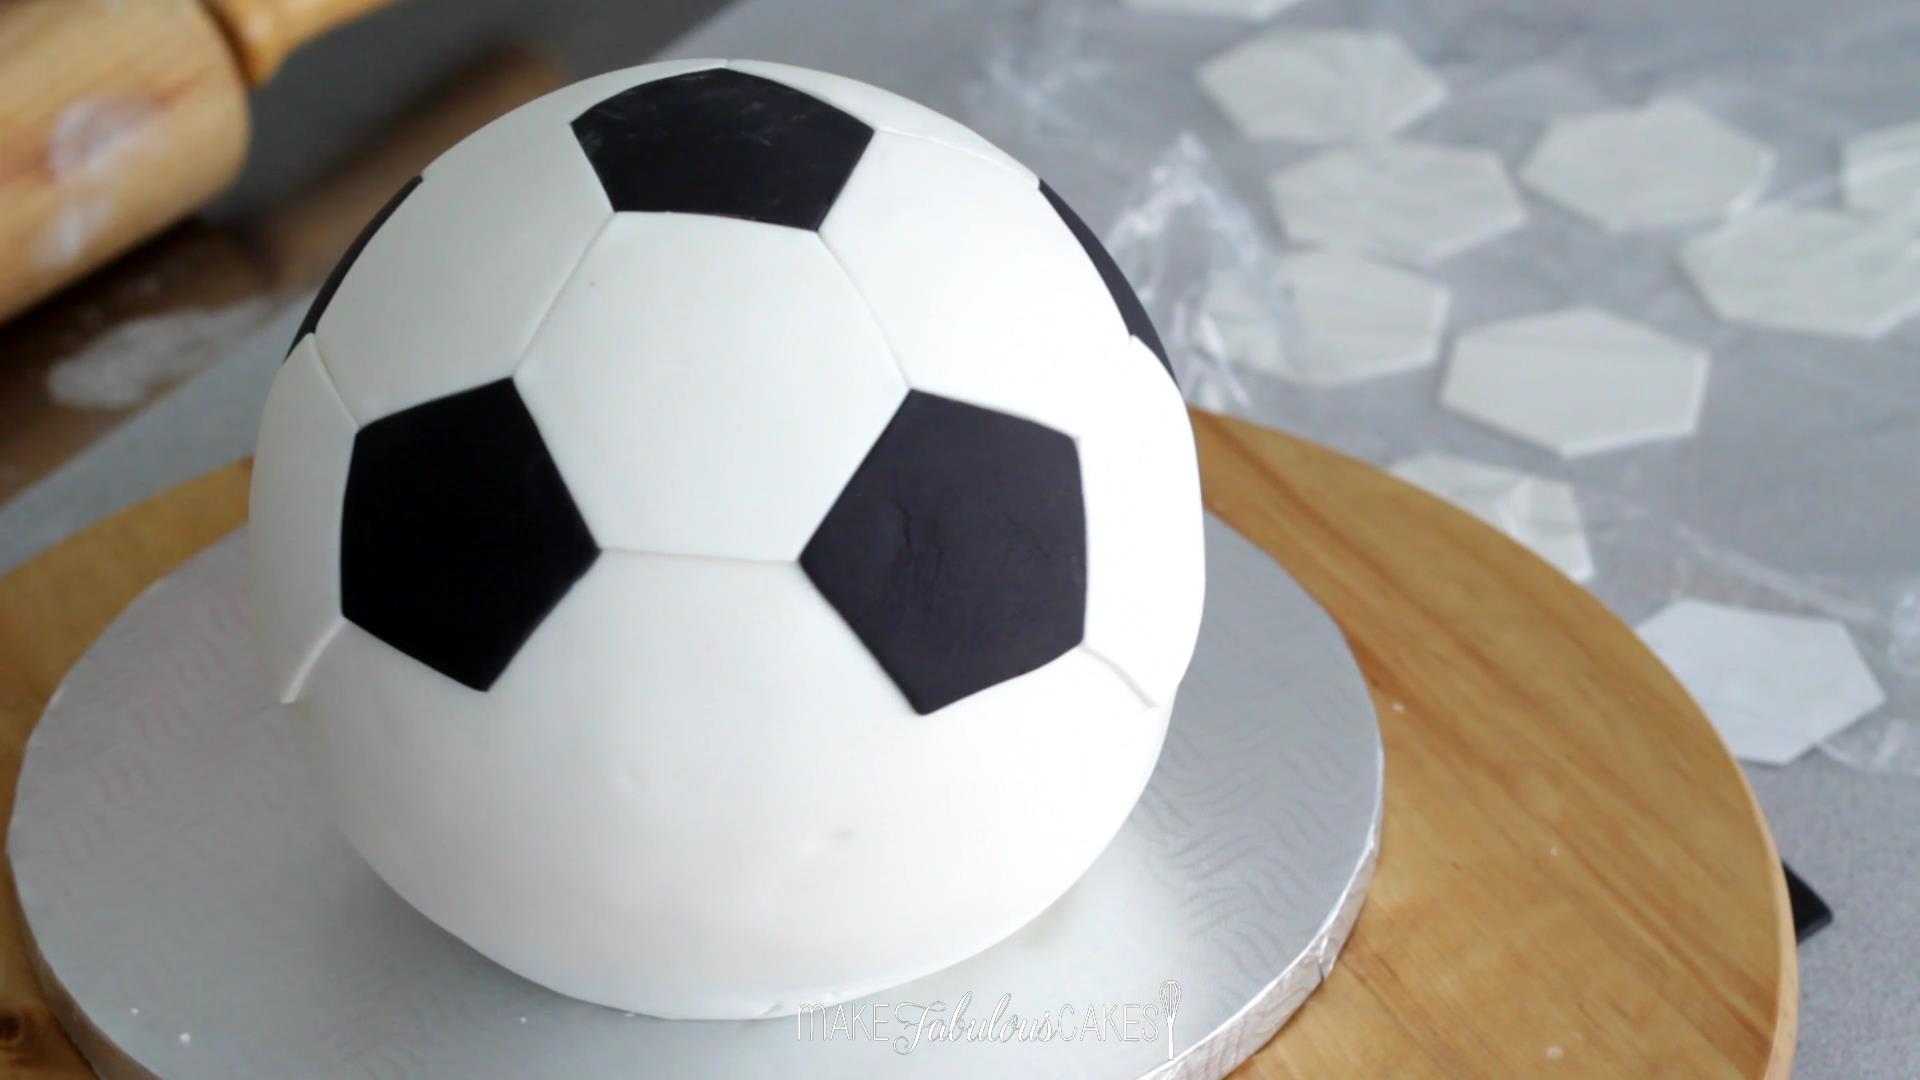 adding the football pattern on the cake